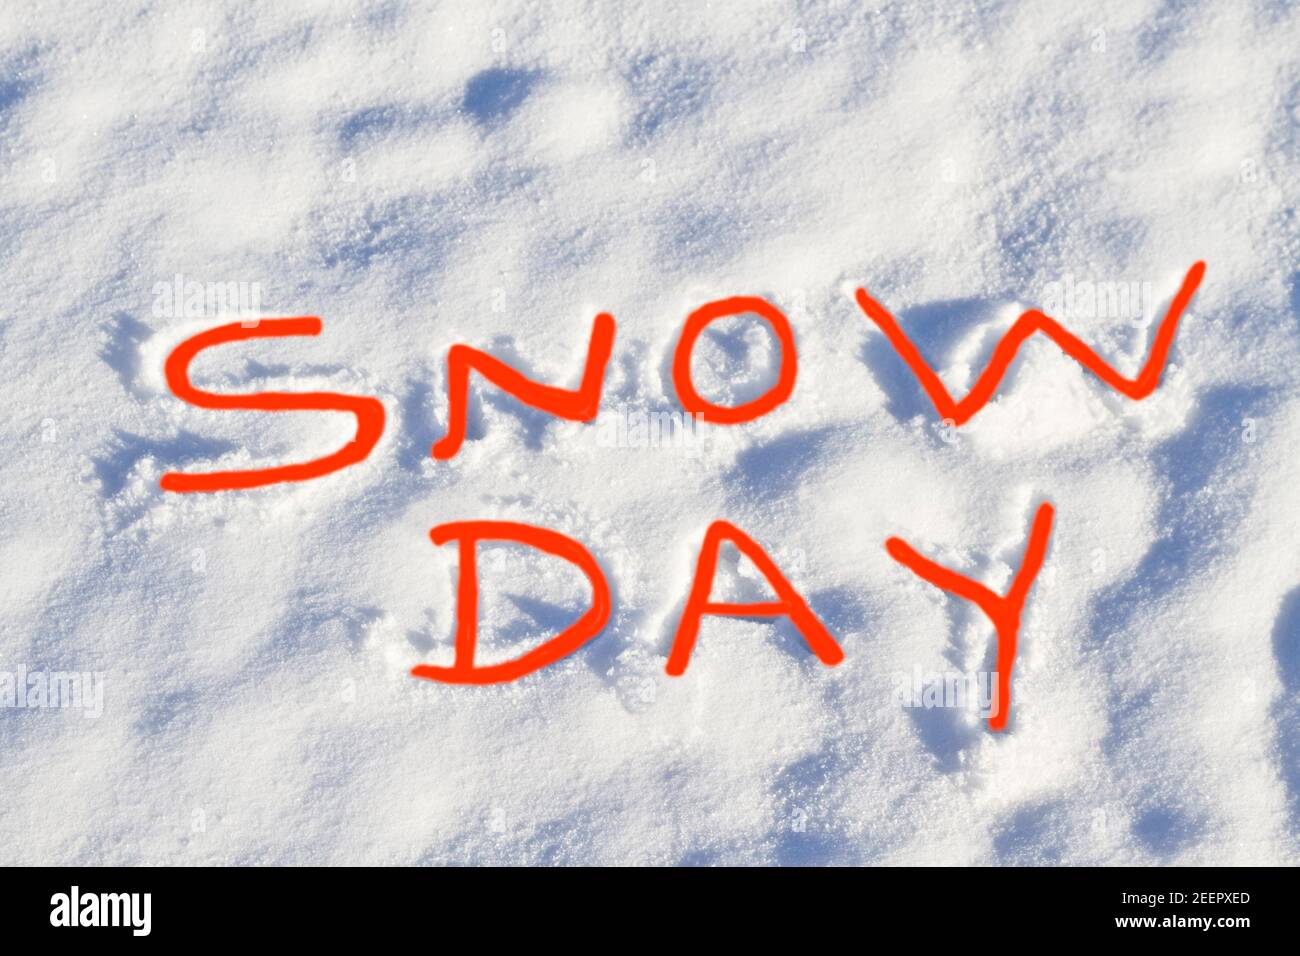 SNOW DAY written in bright red capital letters in fresh snowfall signifies No School and school closure due to dangerous weather conditions. Stock Photo